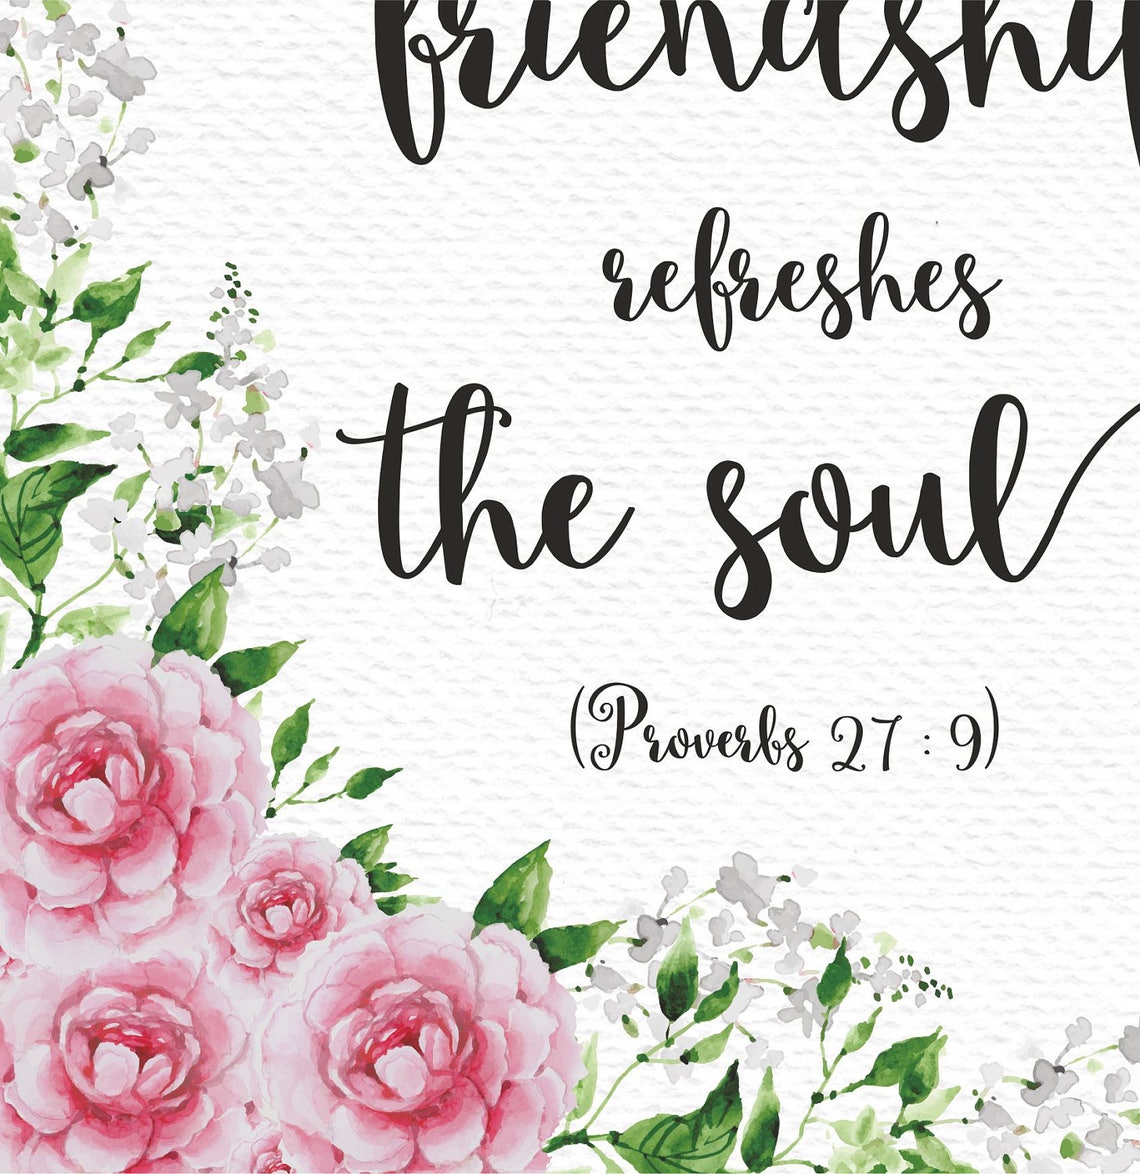 a-sweet-friendship-refreshes-the-soul-proverbs-27-9-bible-etsy